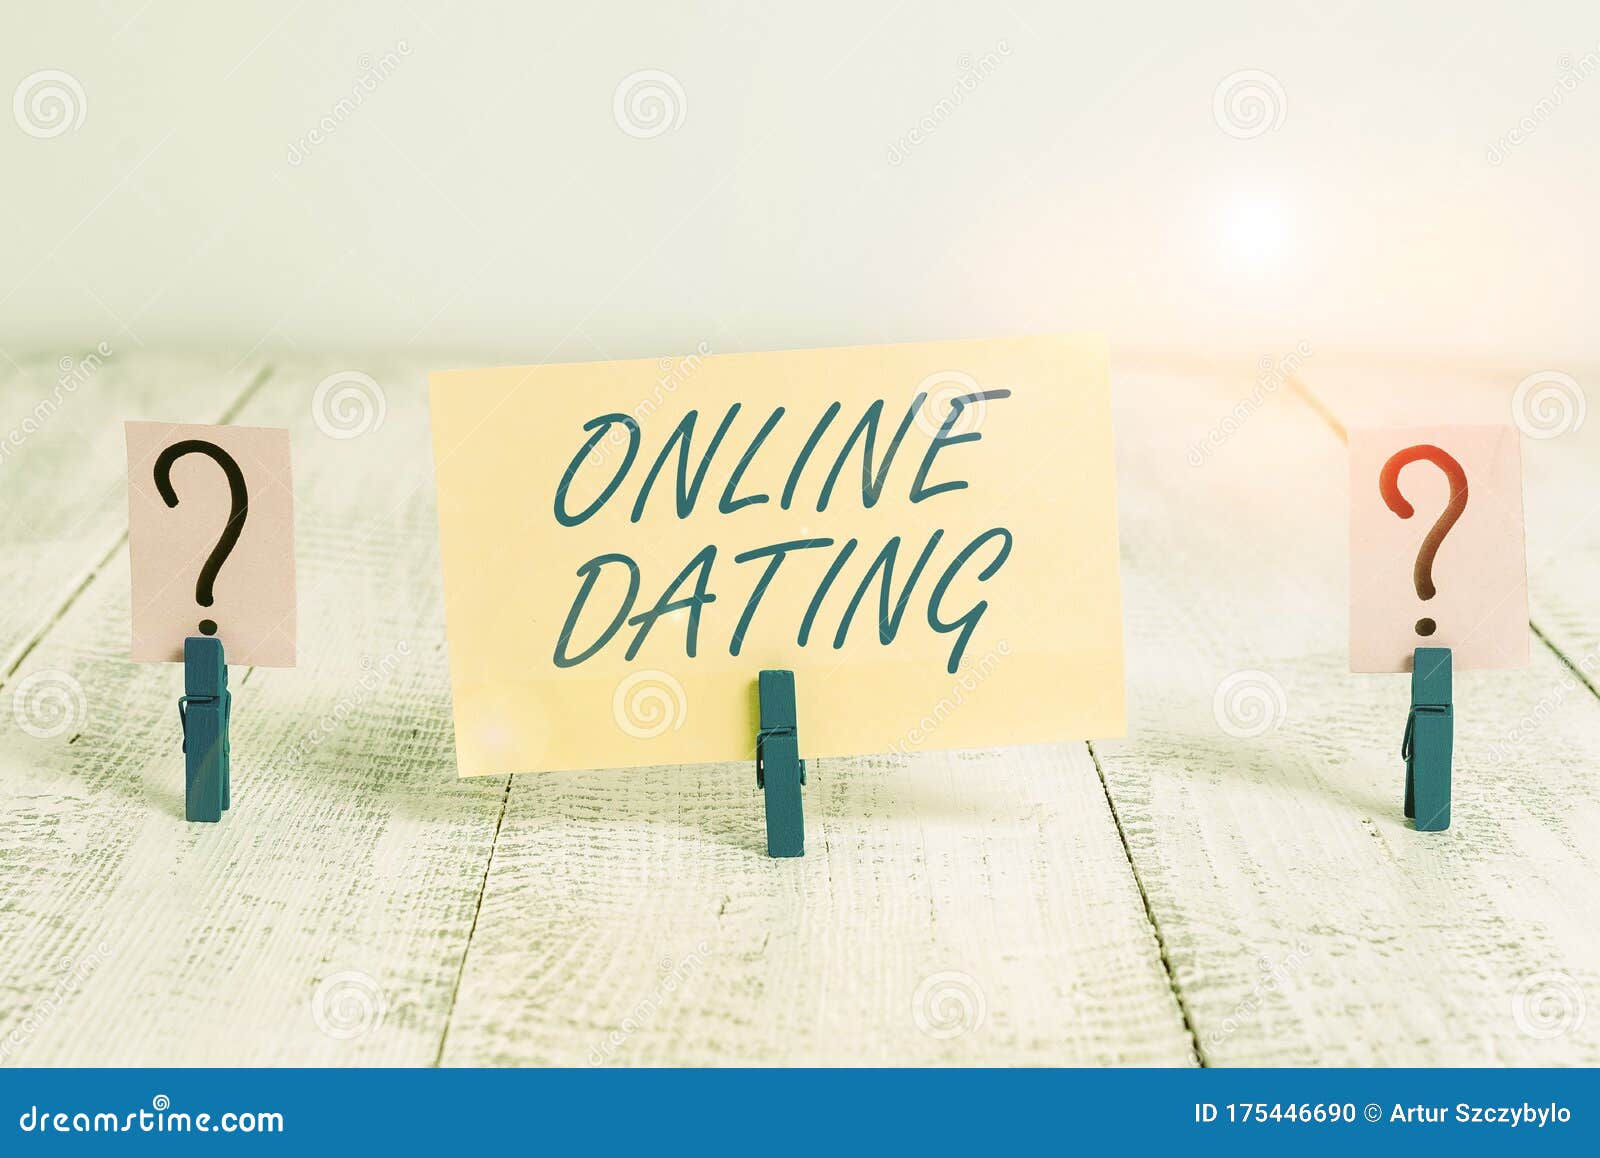 How to build a profitable online dating business?